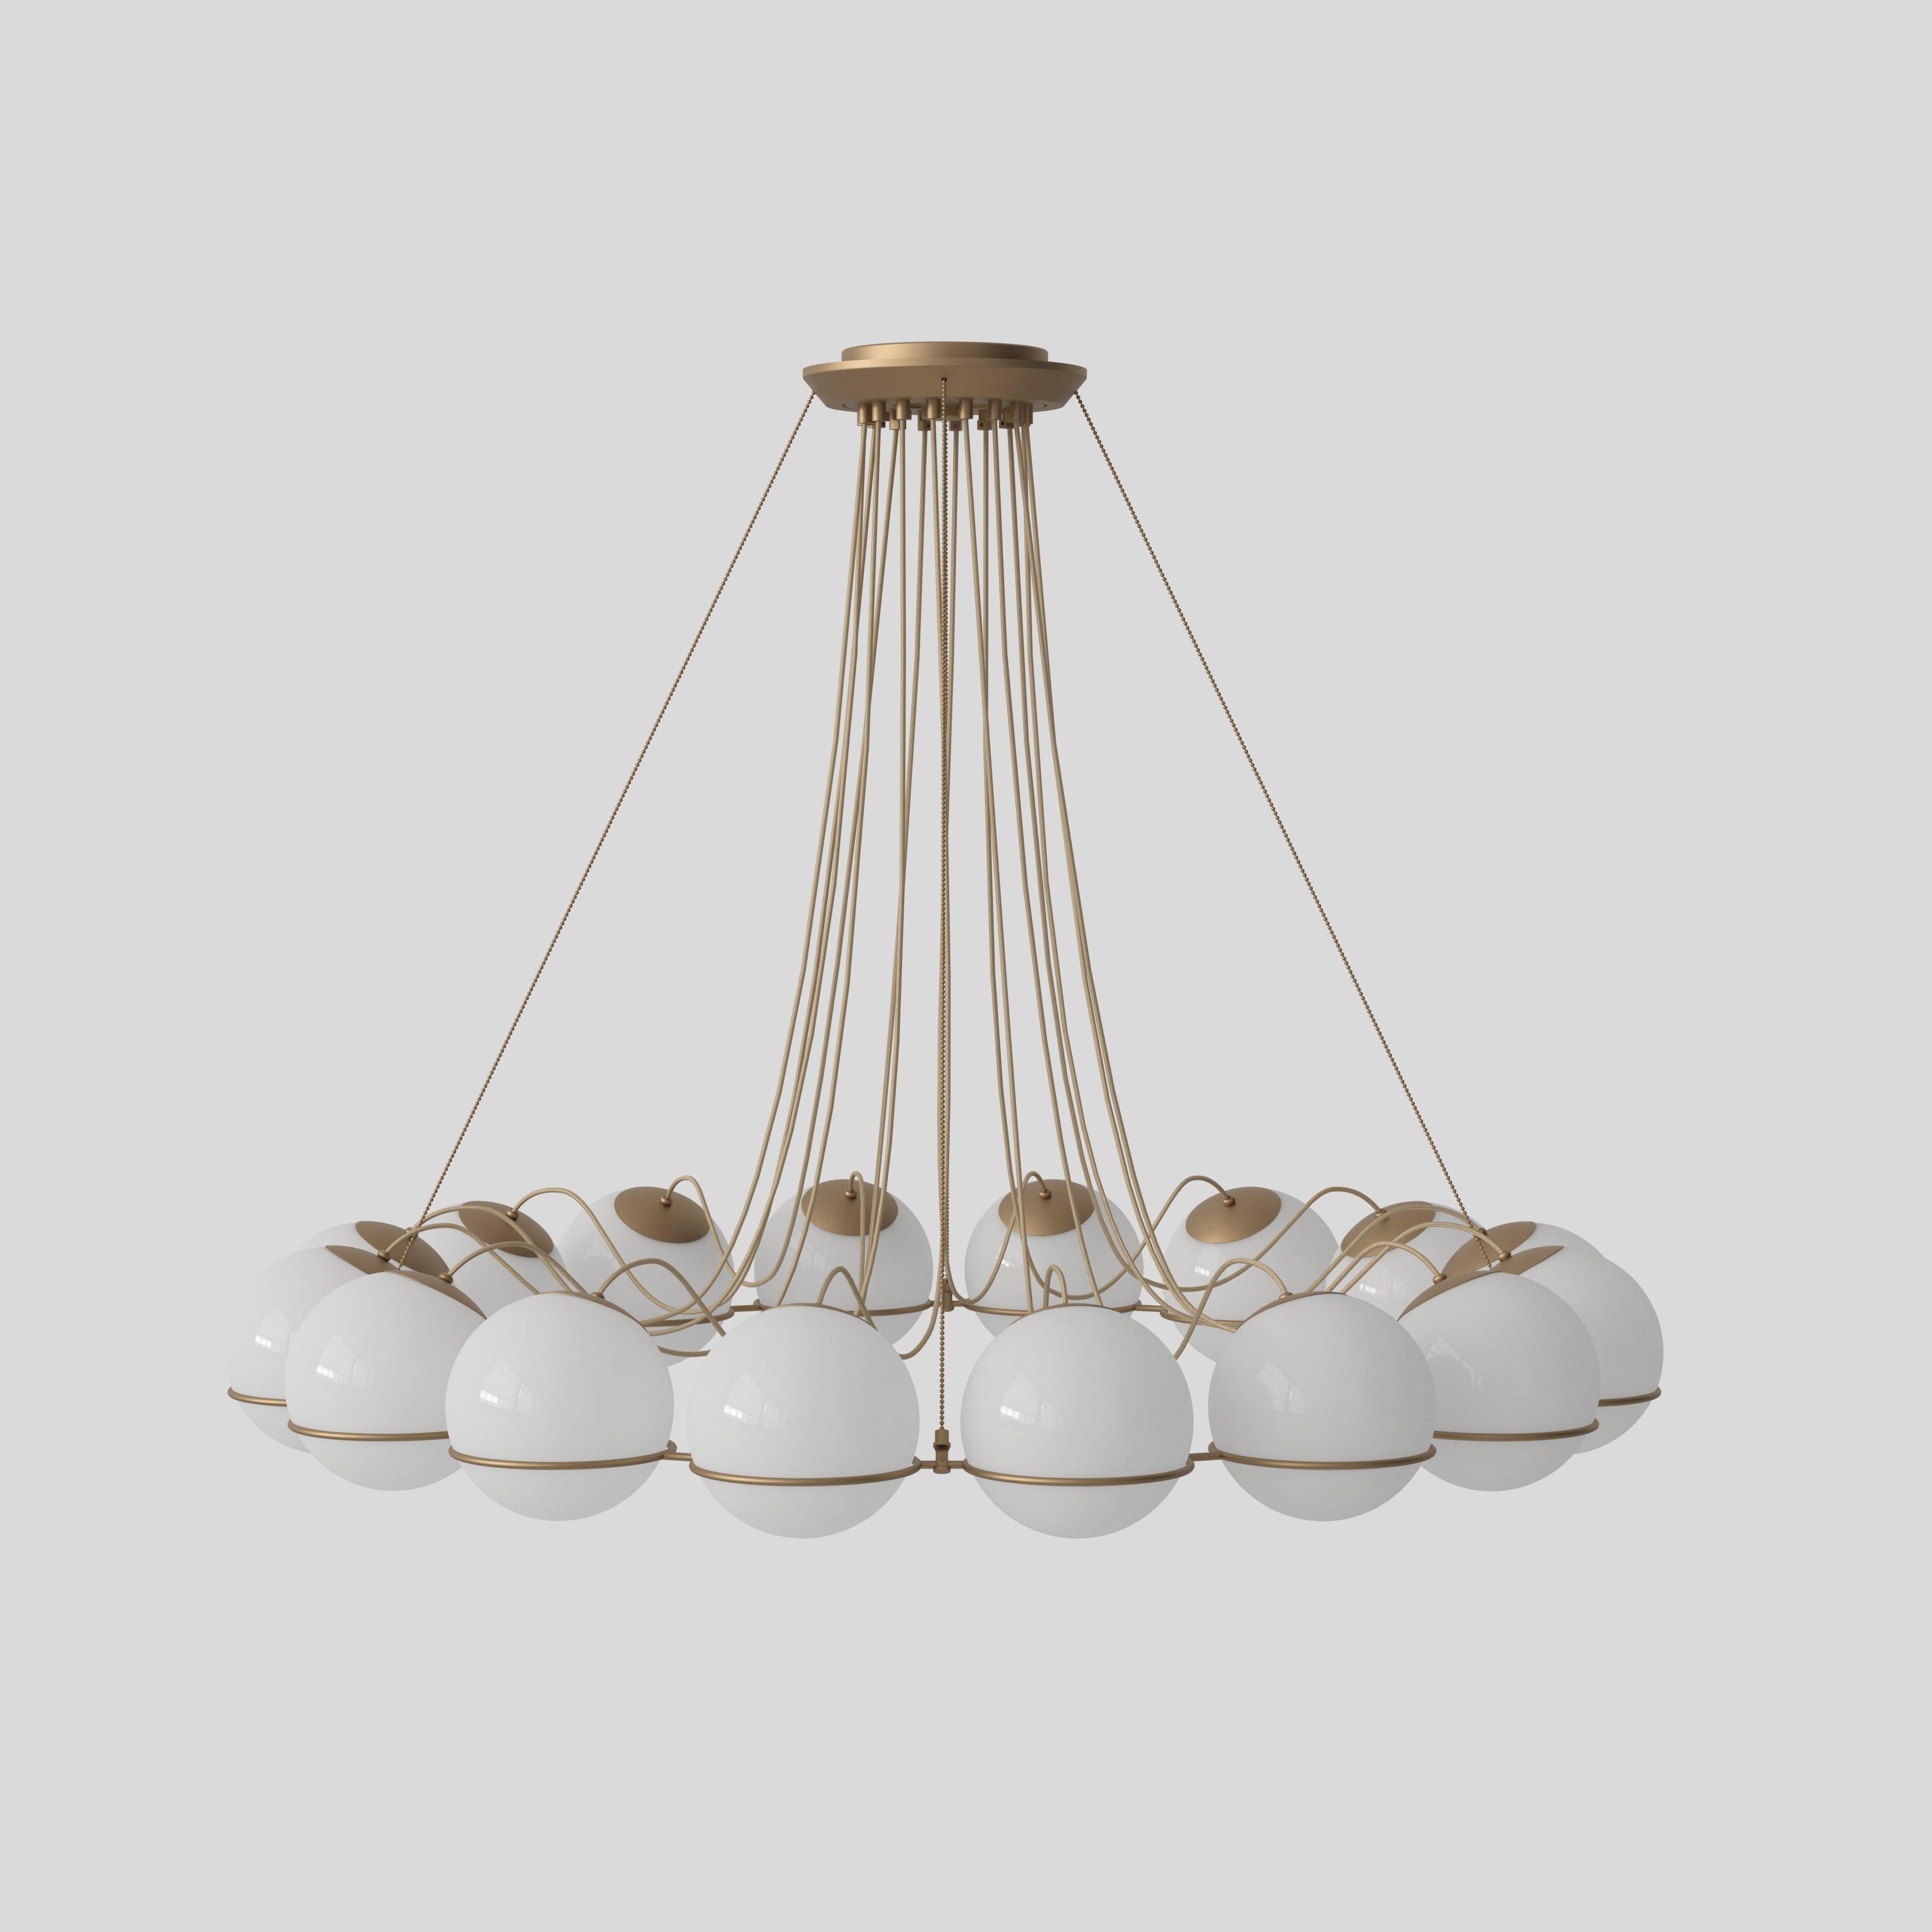 THIS LISTING IS SPECIALLY JUST SELLING THE 16x GLASS OPALINE SPHERES, 

LAMP IS NOT INCLUDED

Model 2109
Design by Gino Sarfatti
The Le Sfere chandelier is composed of a circular array of blown opaline glass spheres. Each sphere is held in place by